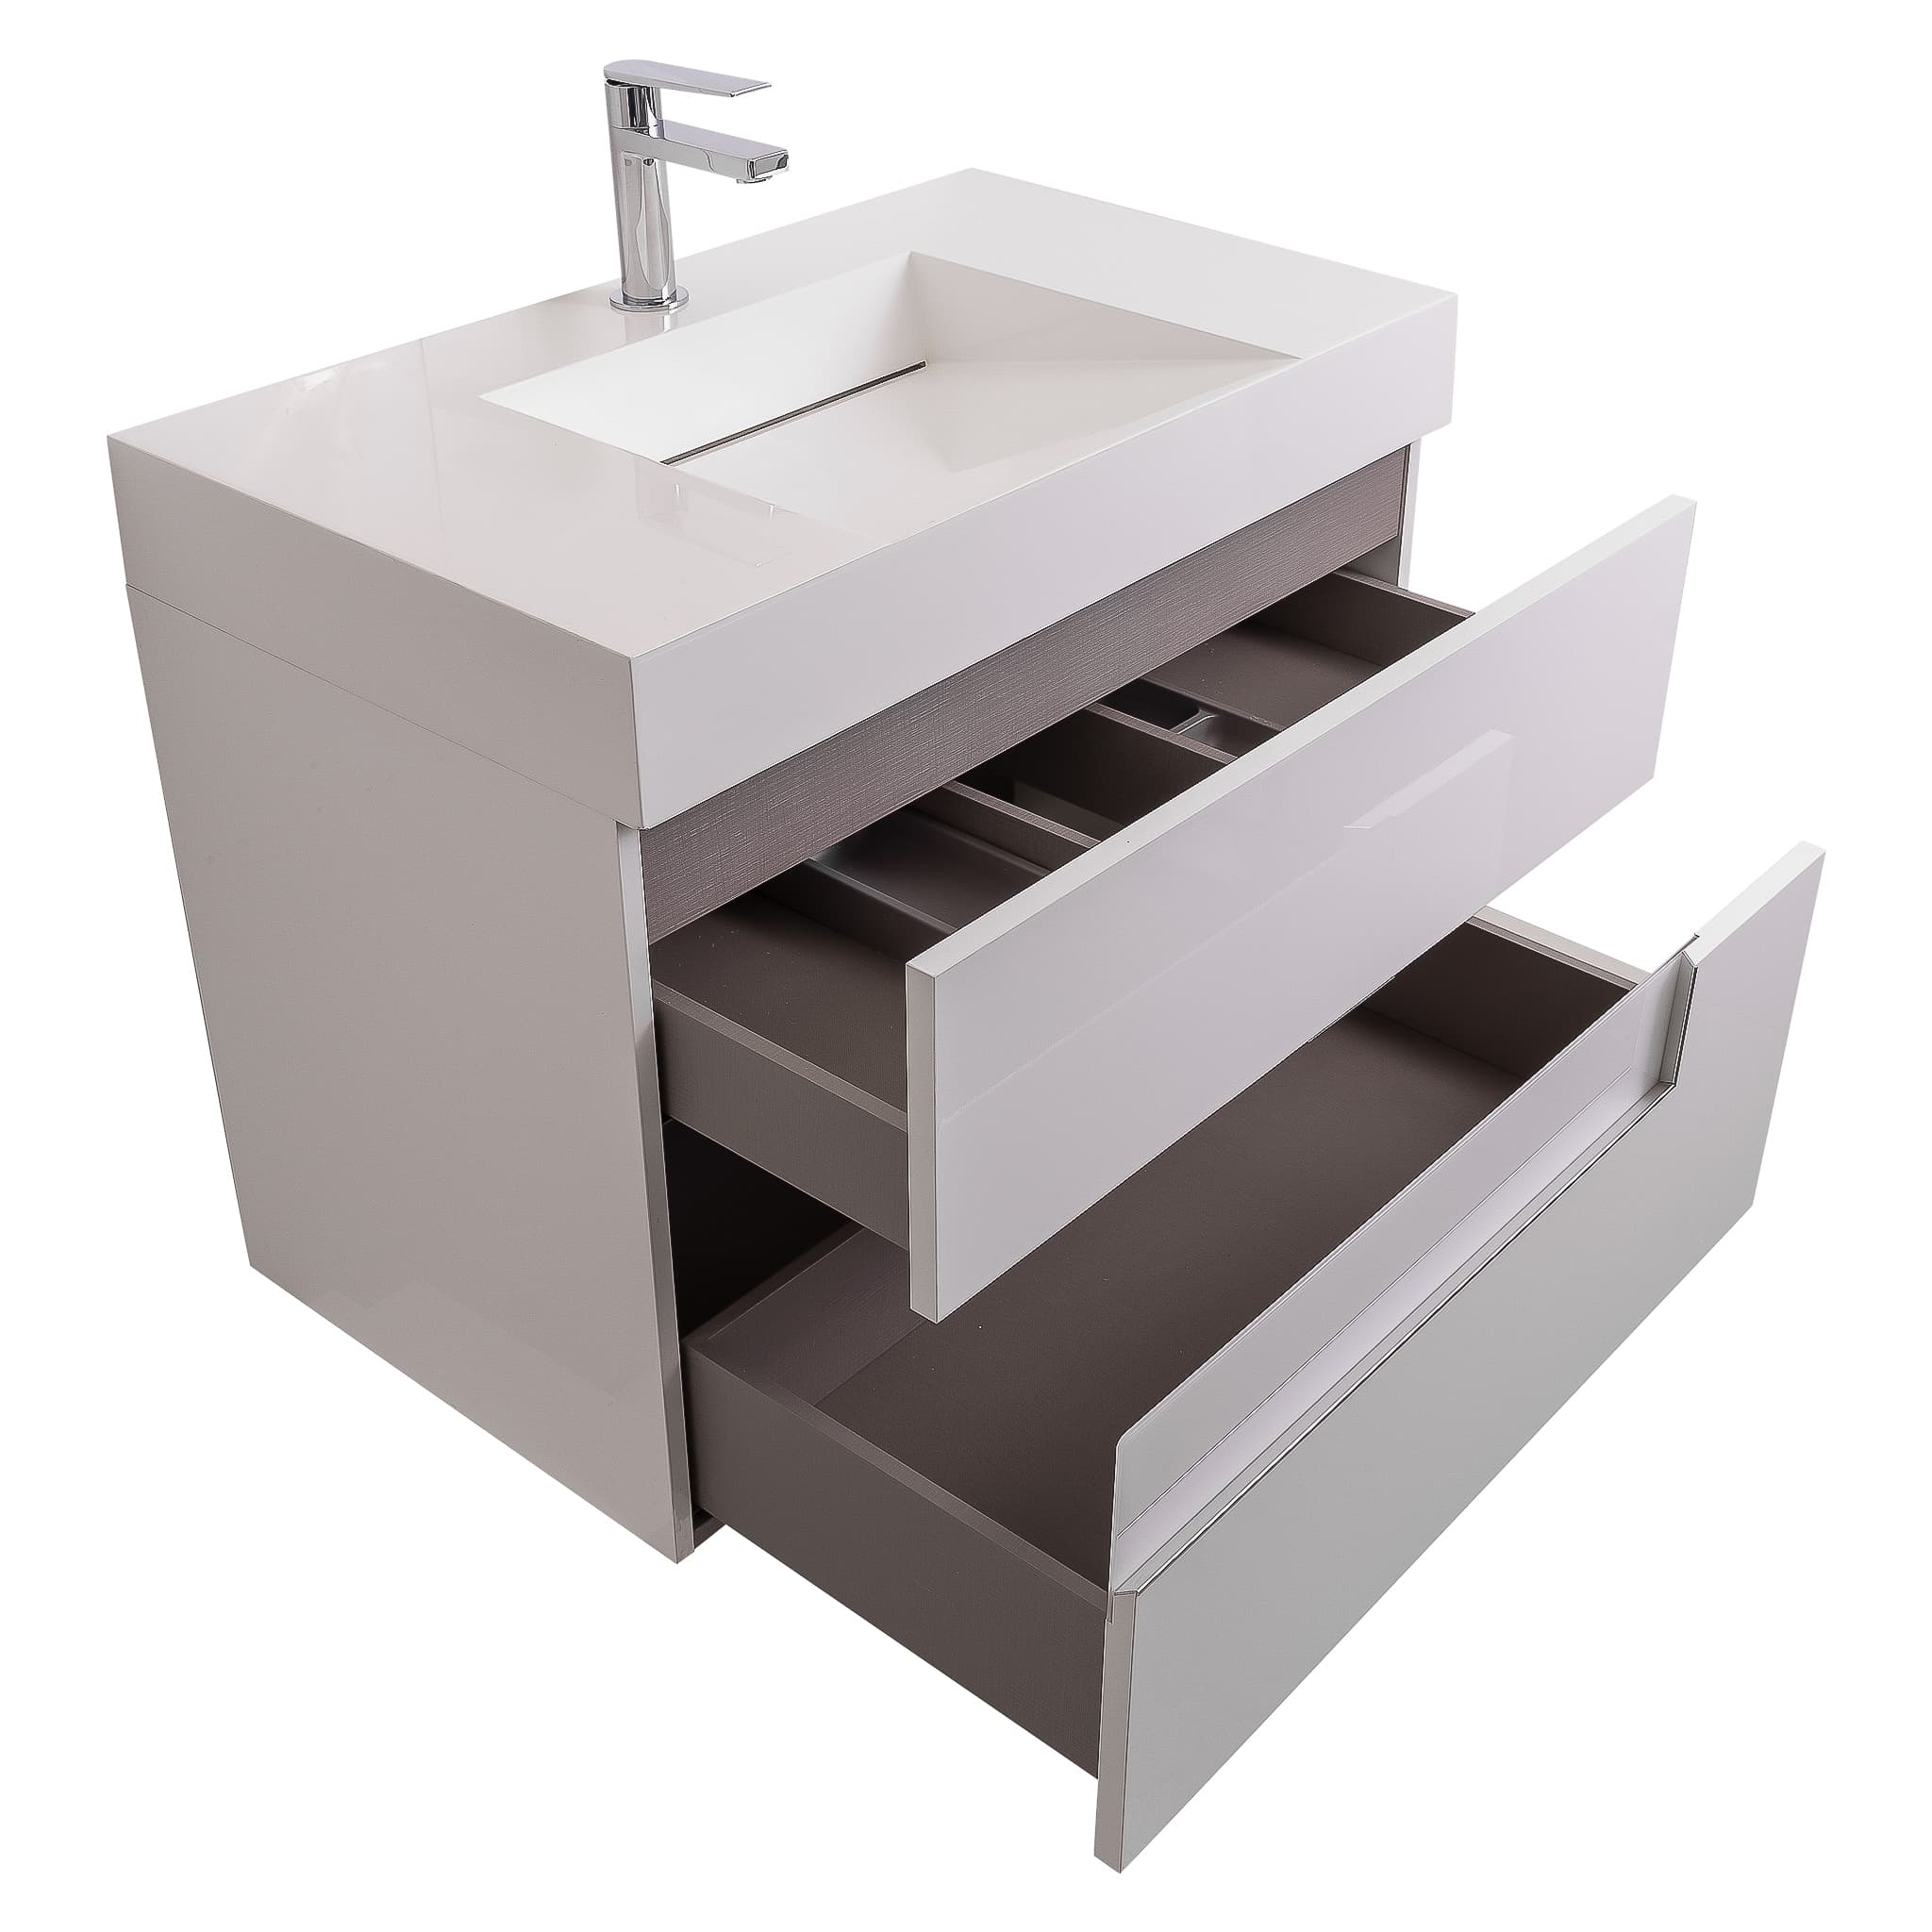 Vision 31.5 White High Gloss Cabinet, Infinity Cultured Marble Sink, Wall Mounted Modern Vanity Set